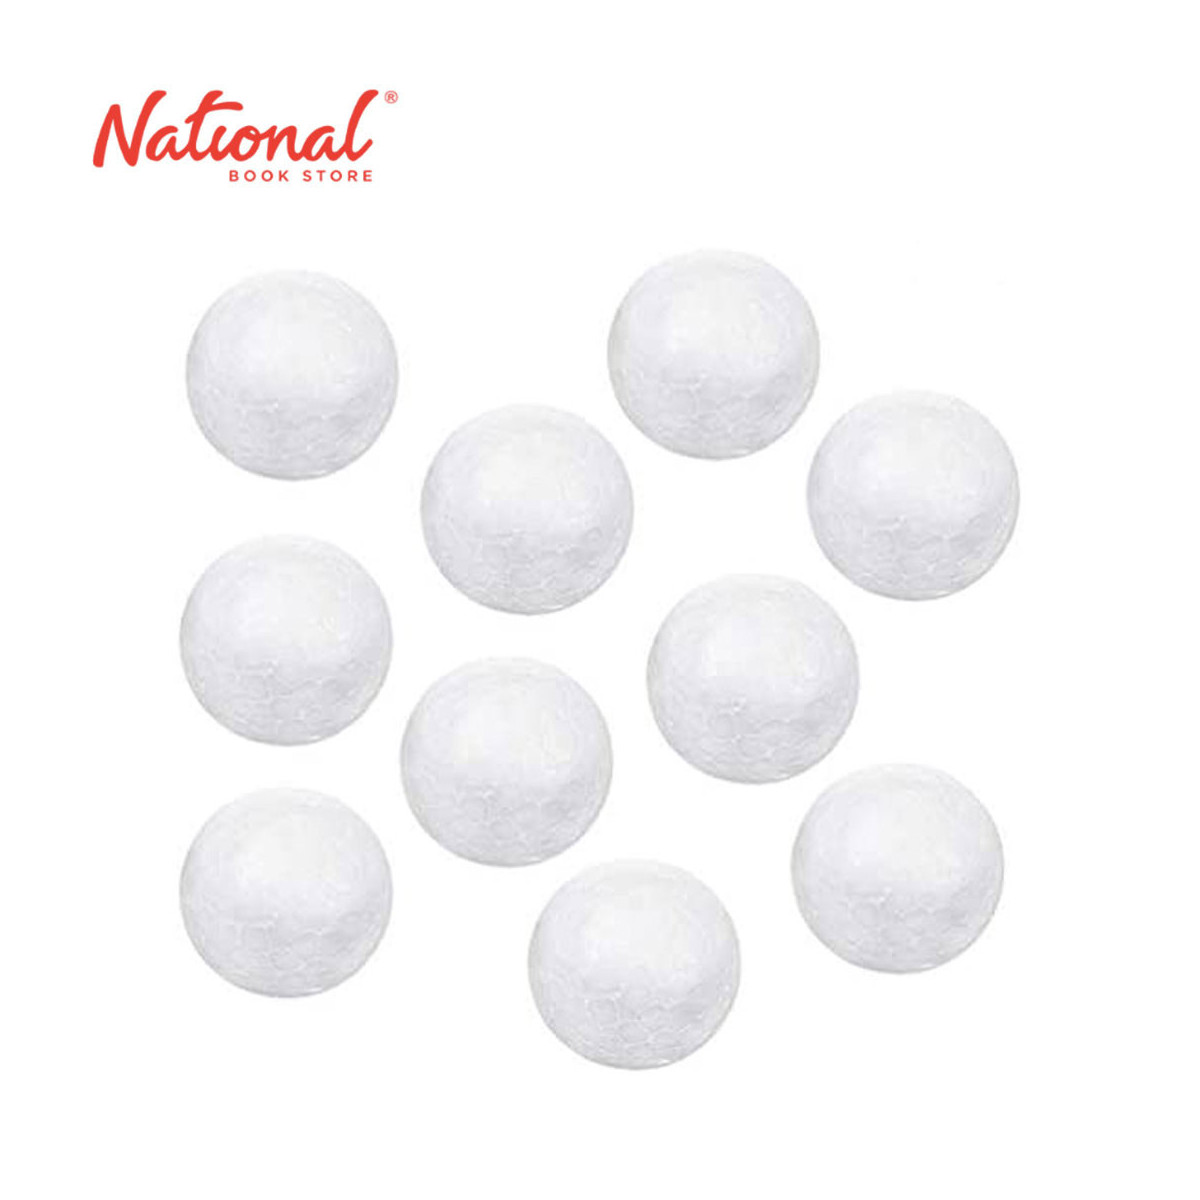 BEST BUY STYROFOAM BALL 2 INCHES PACK OF 10 PIECES - ARTS & CRAFTS SUPPLIES